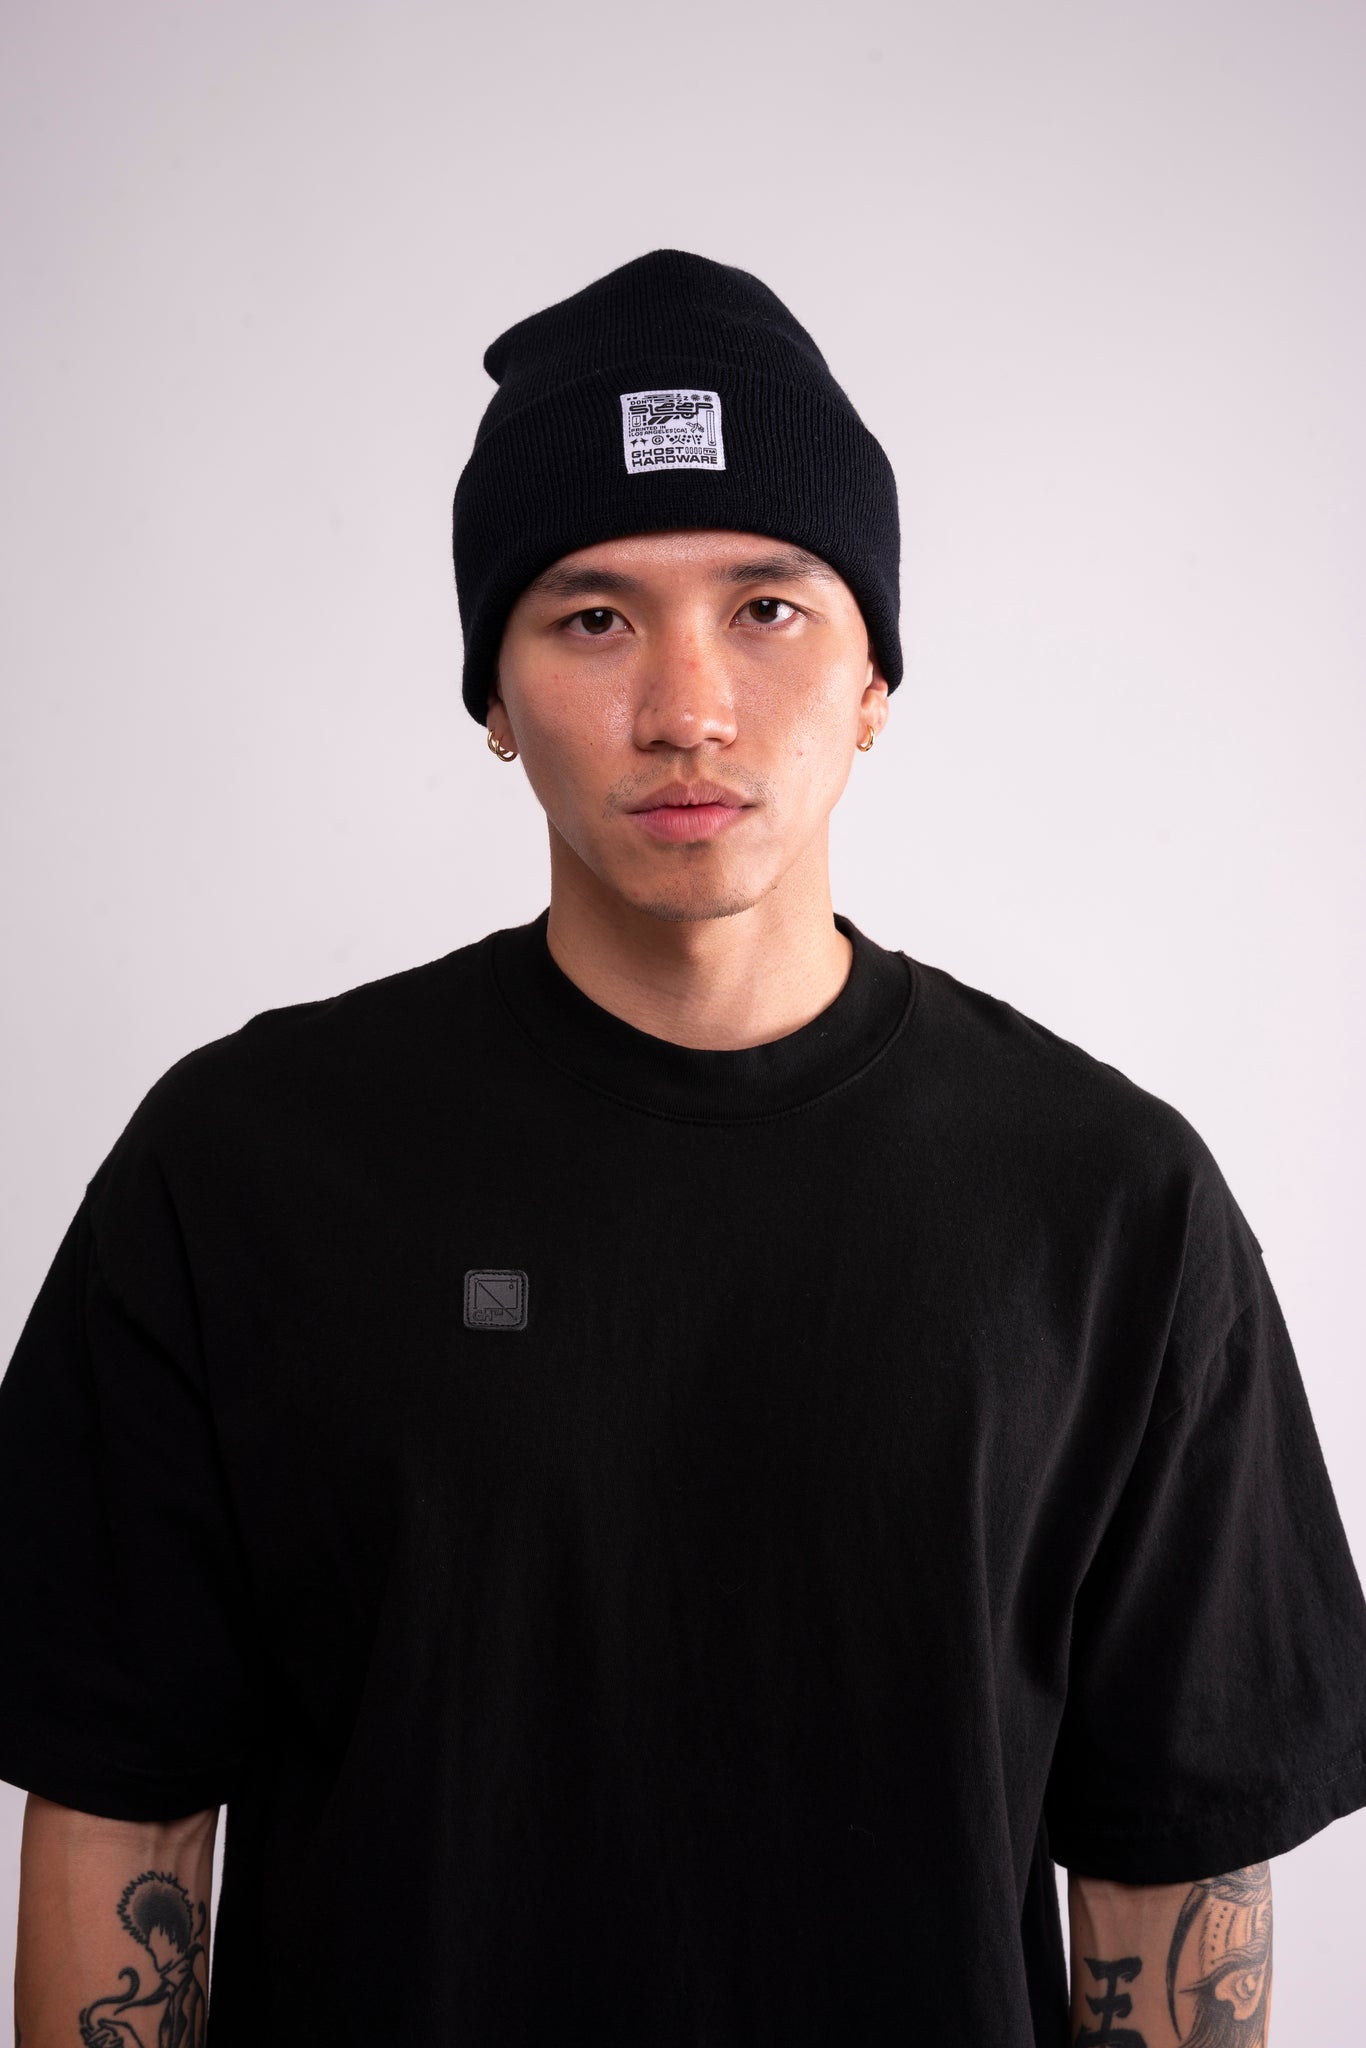 Ghost Hardware [ patch ] Beanie